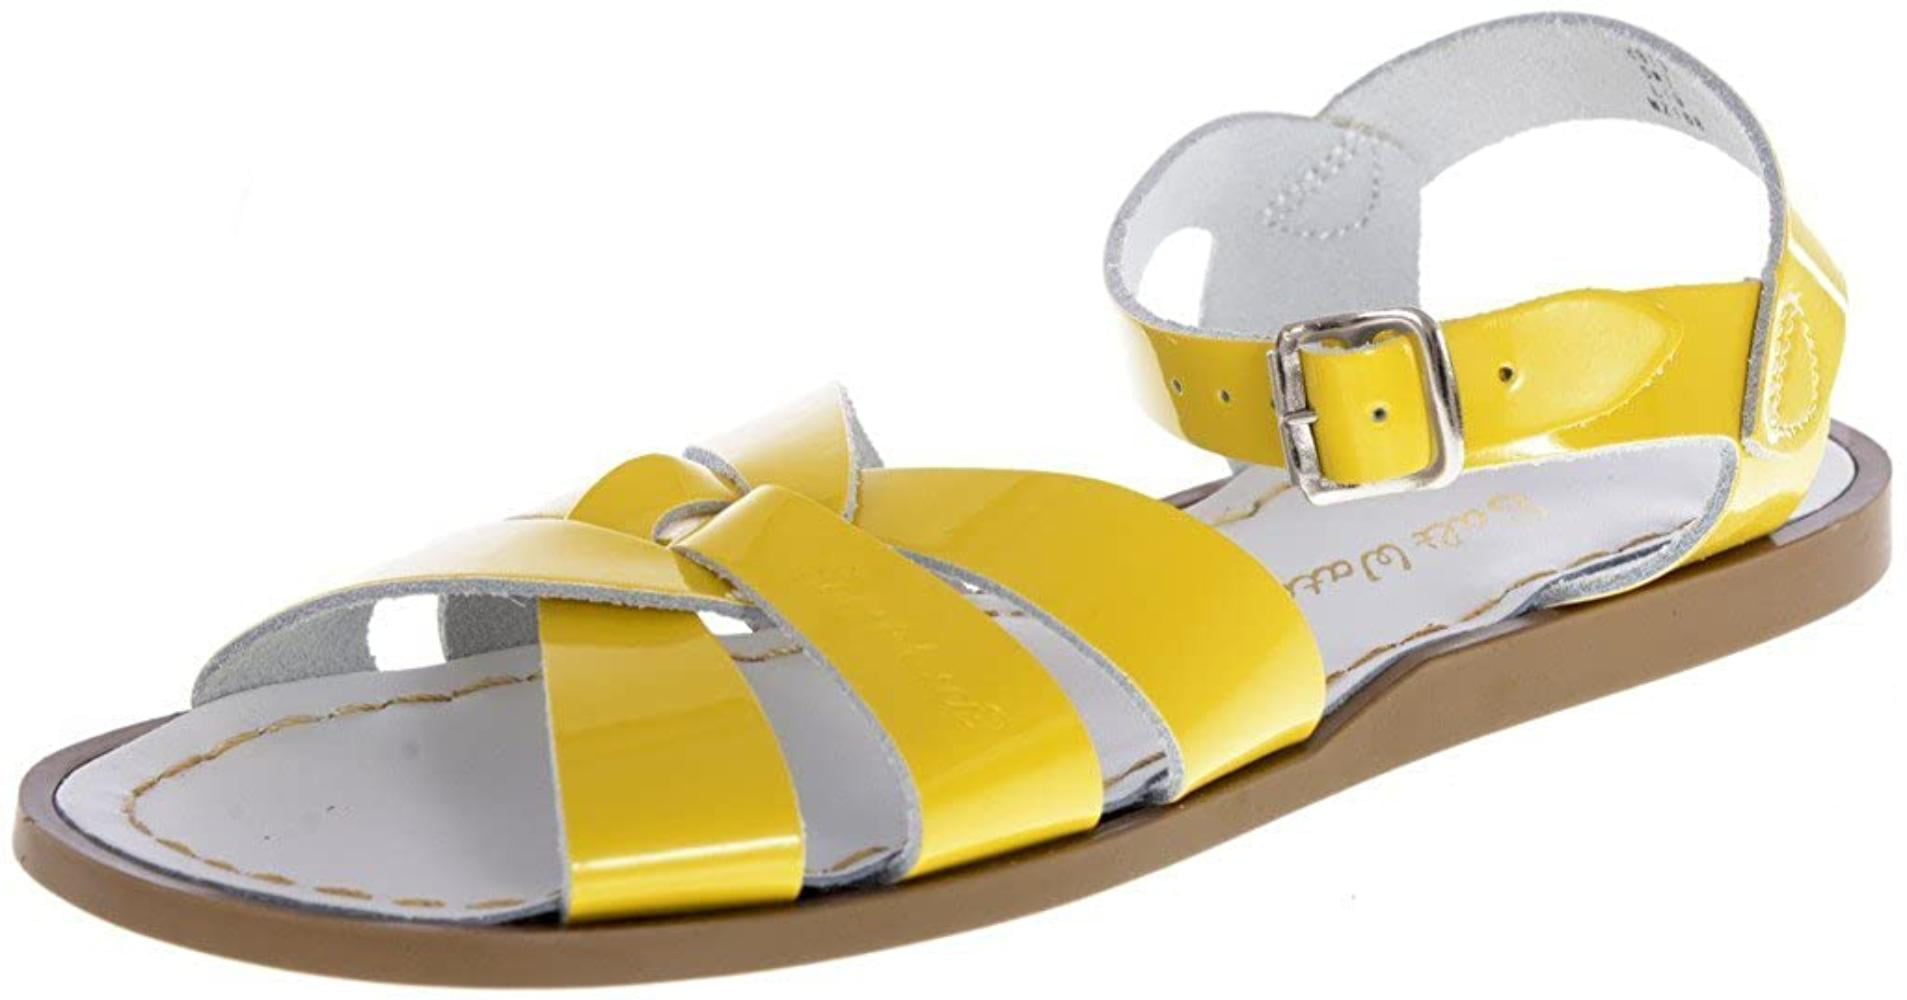 Toddler/Little Kid/Big Kid/Womens K Salt Water Sandals by Hoy Shoe Strappy Sandal Saltwater by Hoy Style 8100